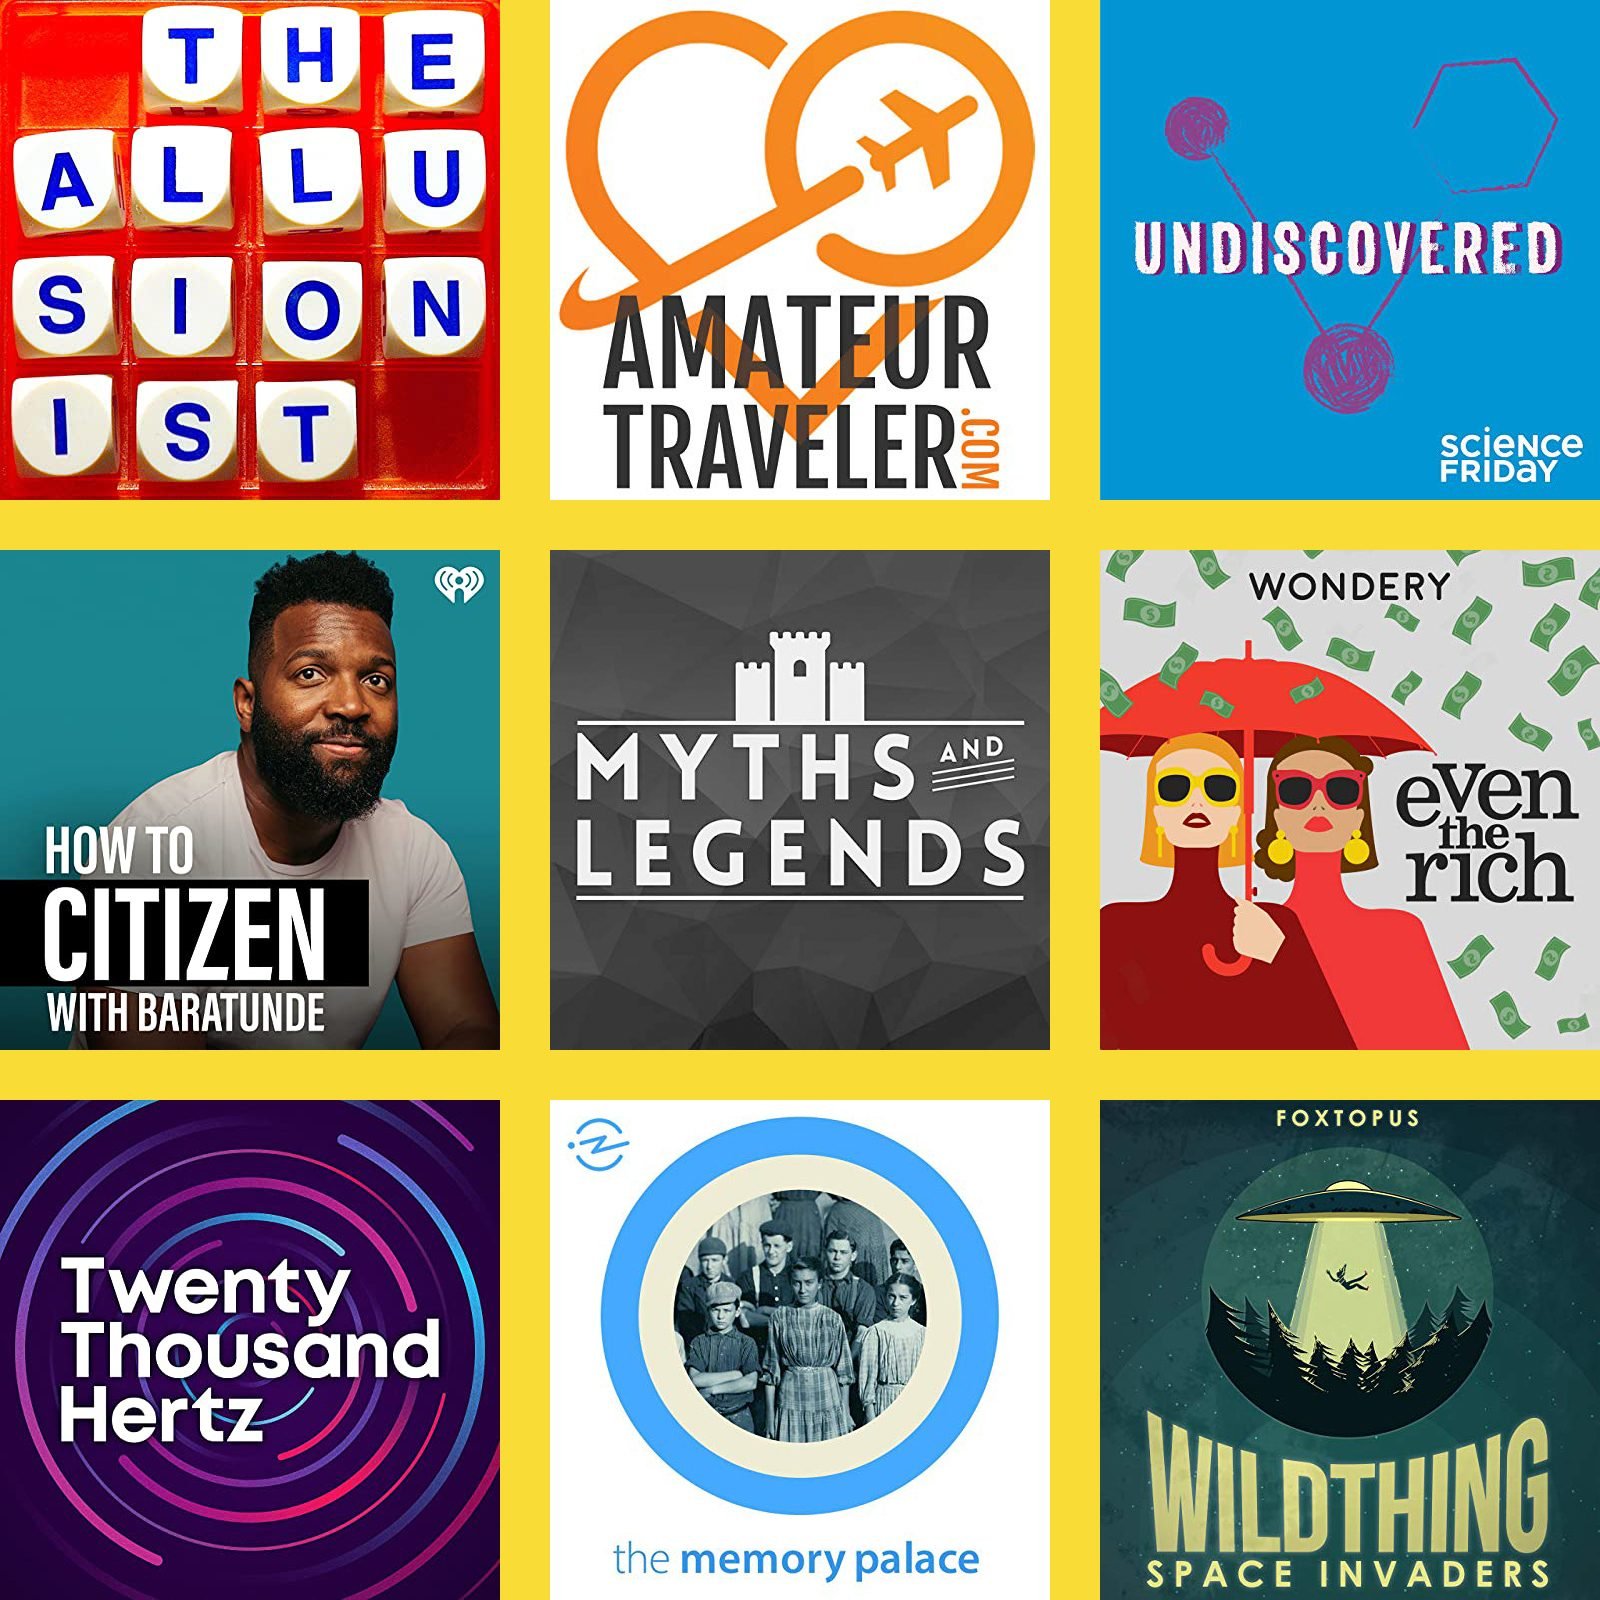 best road trip podcasts